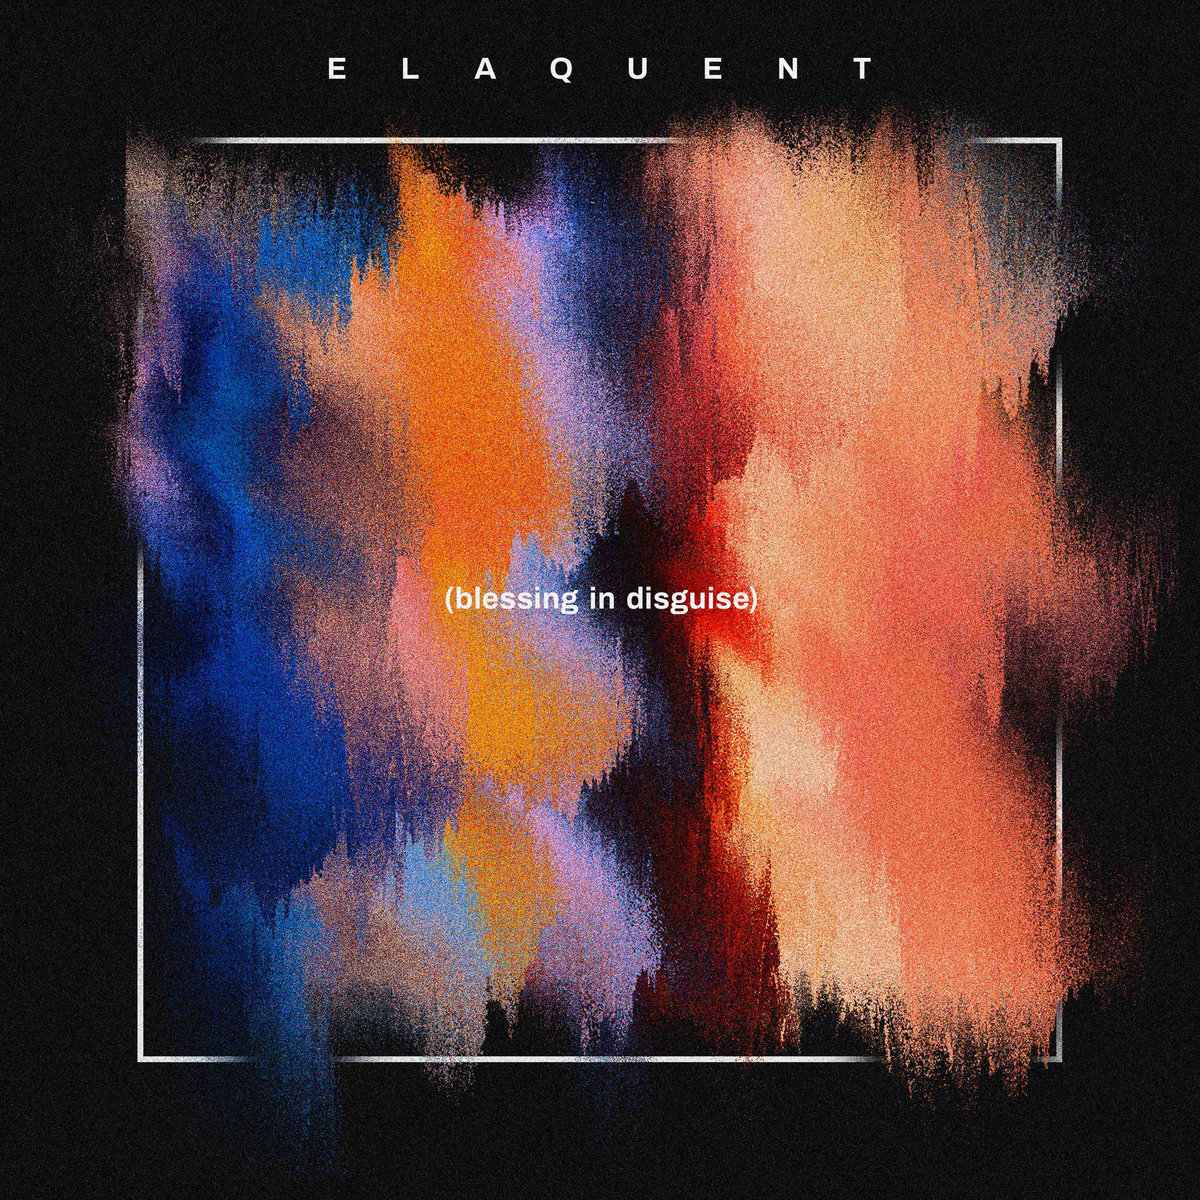   Elaquent - Blessing in Disguise   11. Moment of Weakness (feat.     Seb Zillner) Flute &amp; Co-Production Seb Zillner   © 2019 Mello Music Group  Watch on YouTube  